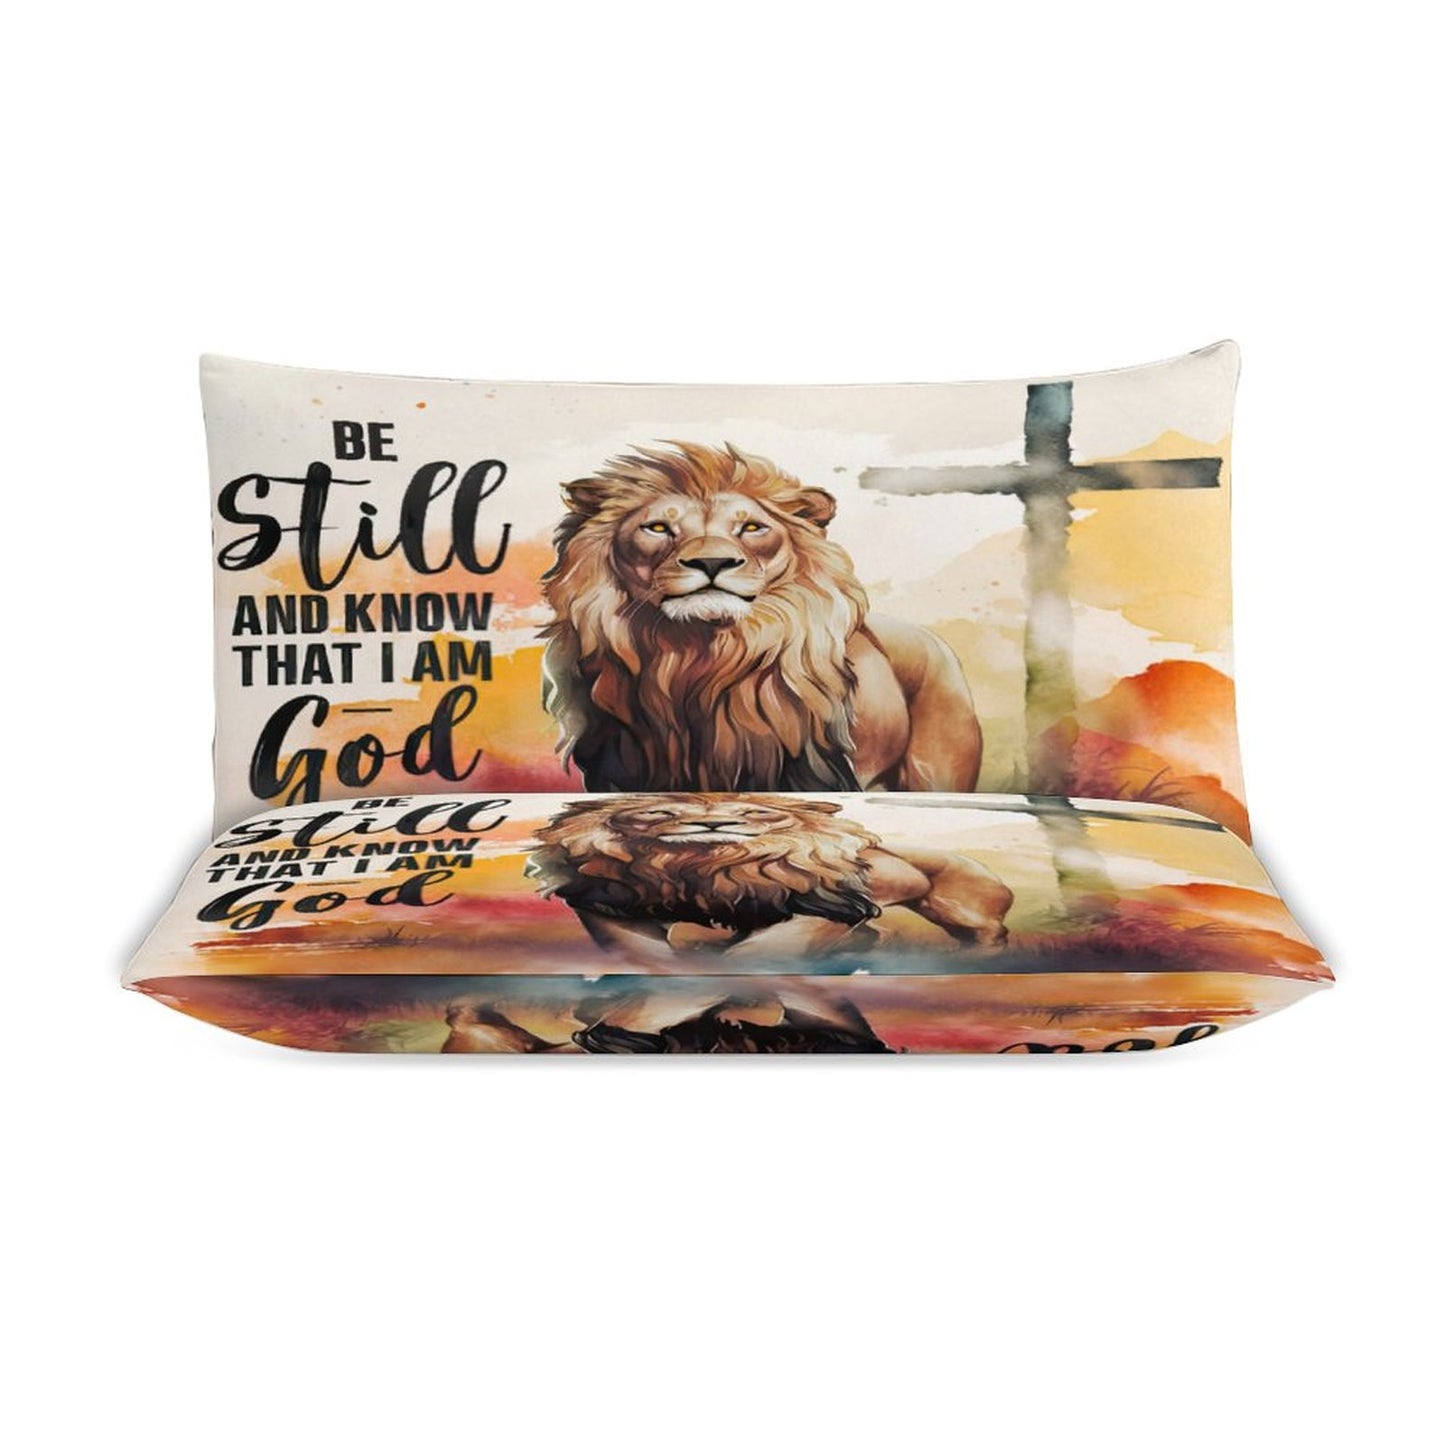 Be Still And Know That I Am God 3-Piece Christian Bedding Set- (Dual-sided Printing)